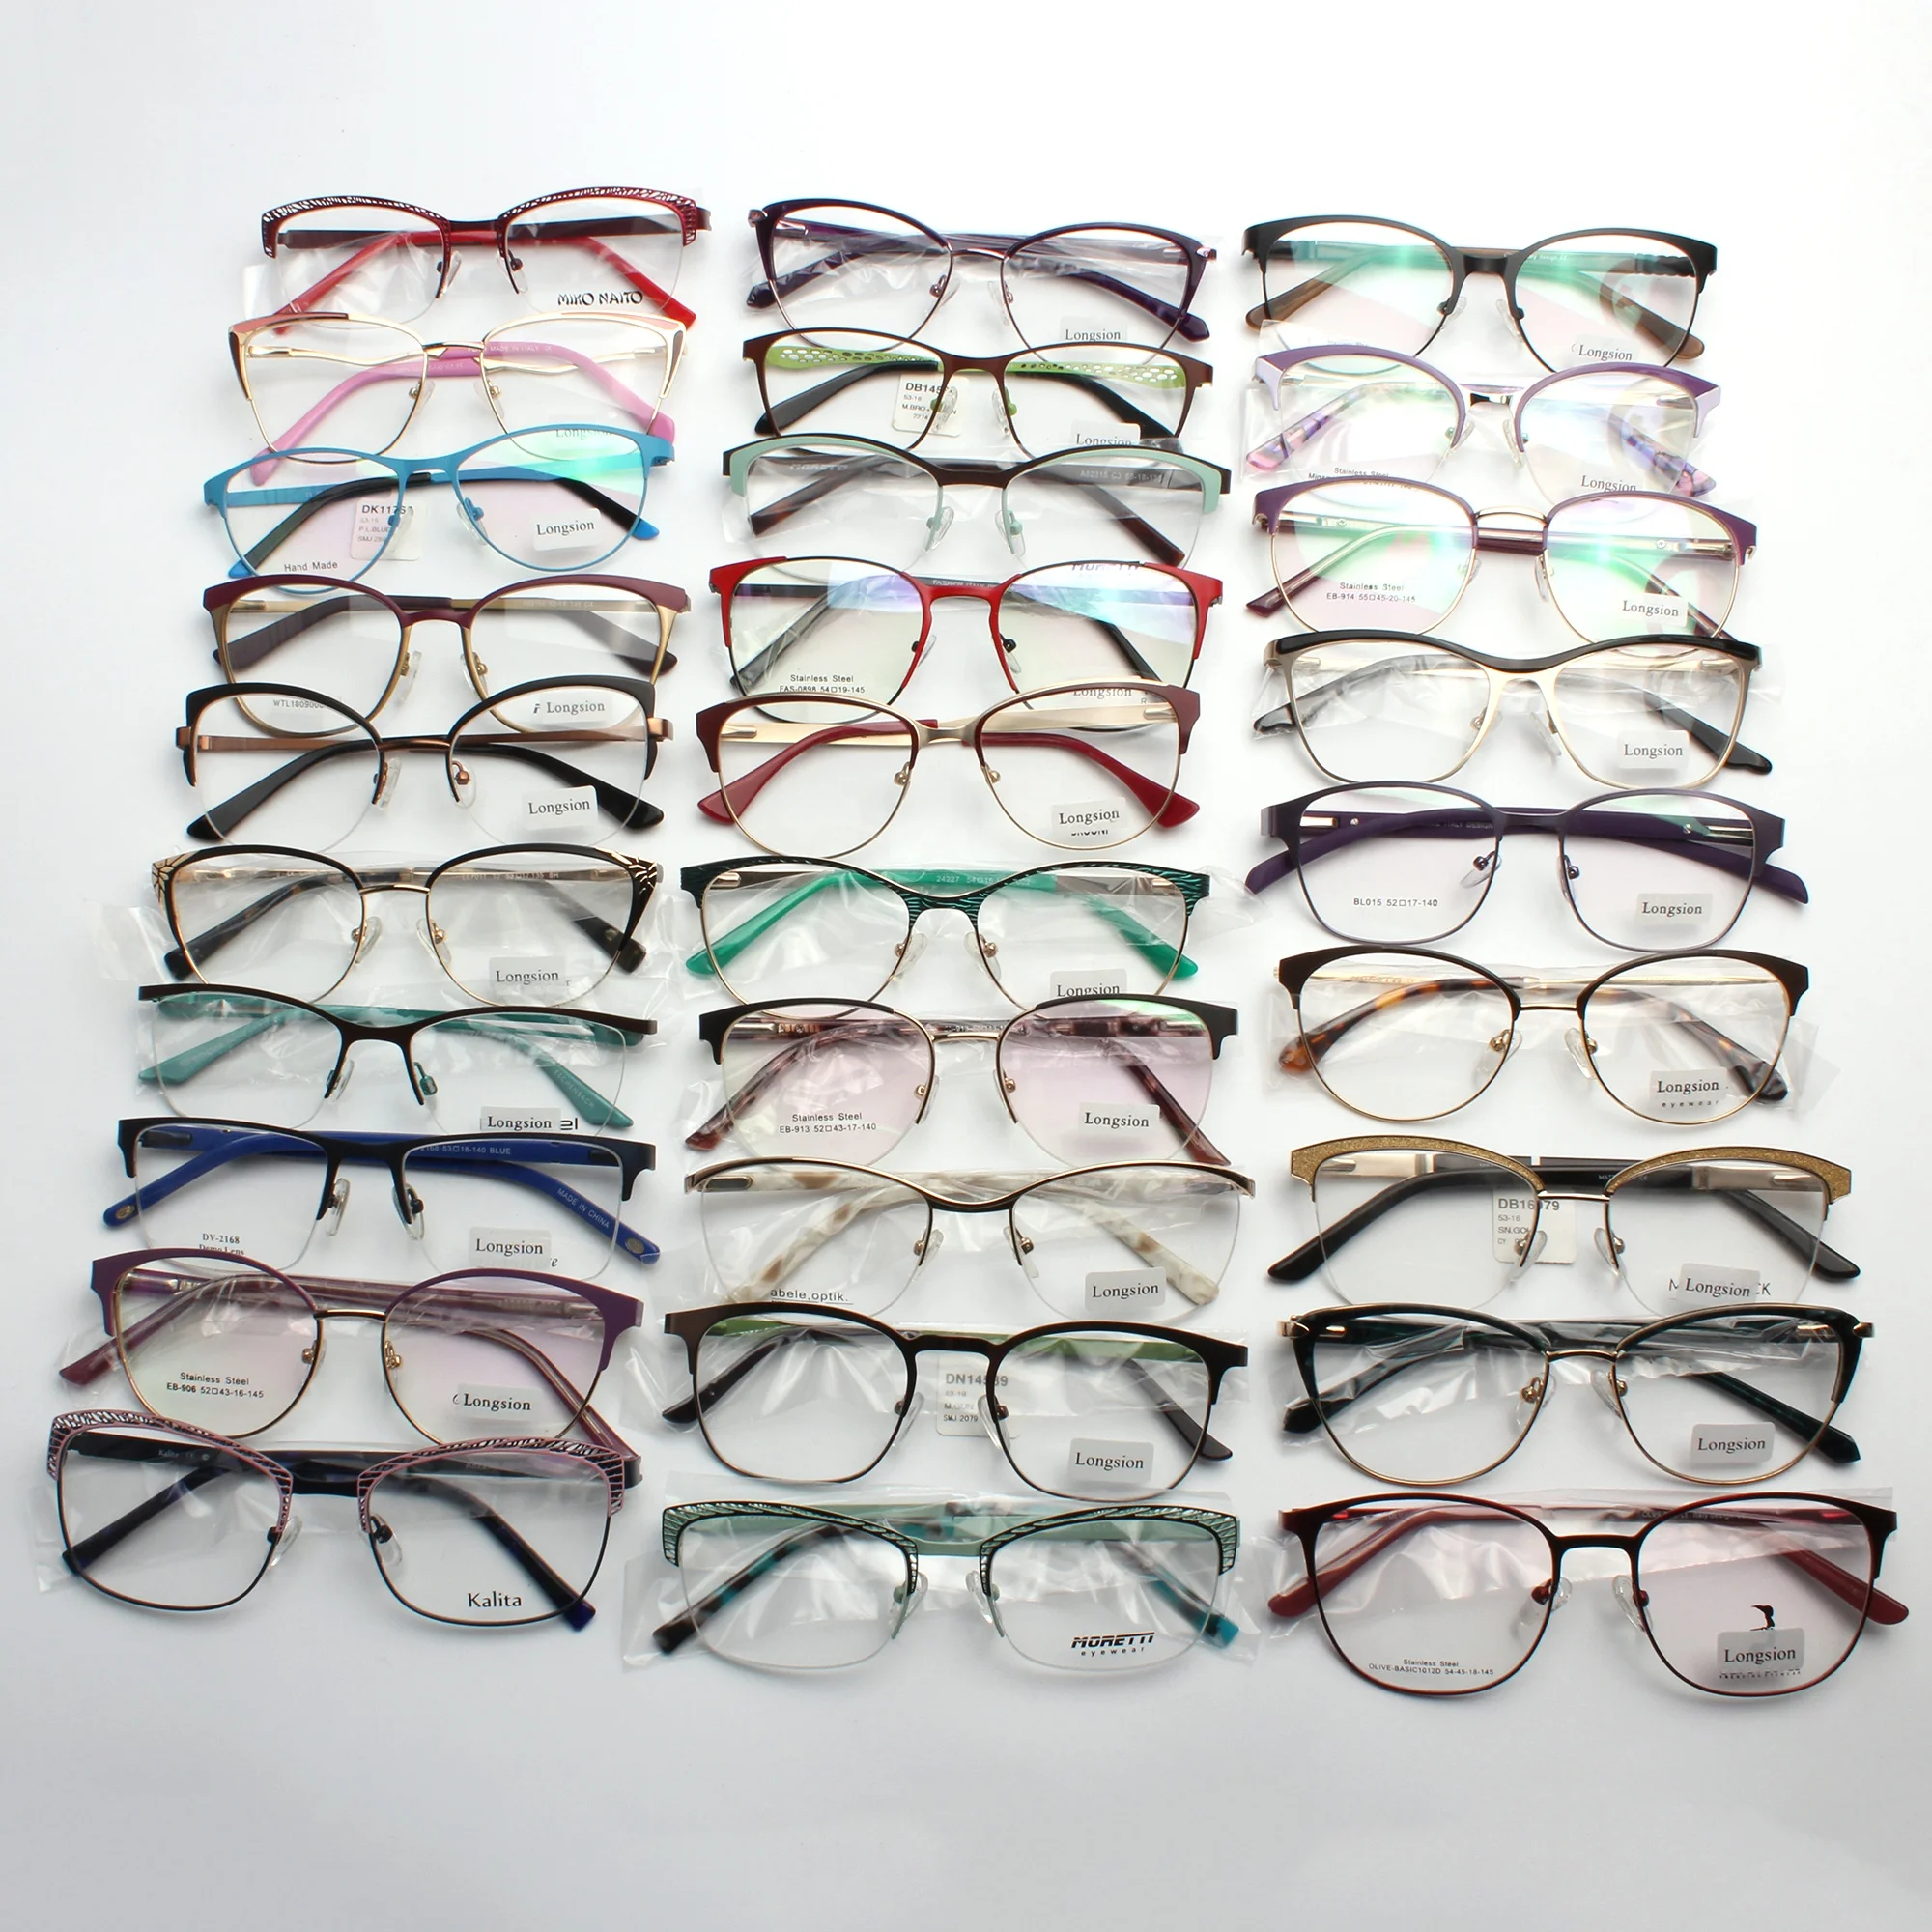 

Cheap price assorted Eyeglasses frame metal stock ready optical glasses frames for shop, Mixed colors cheap price optical frames